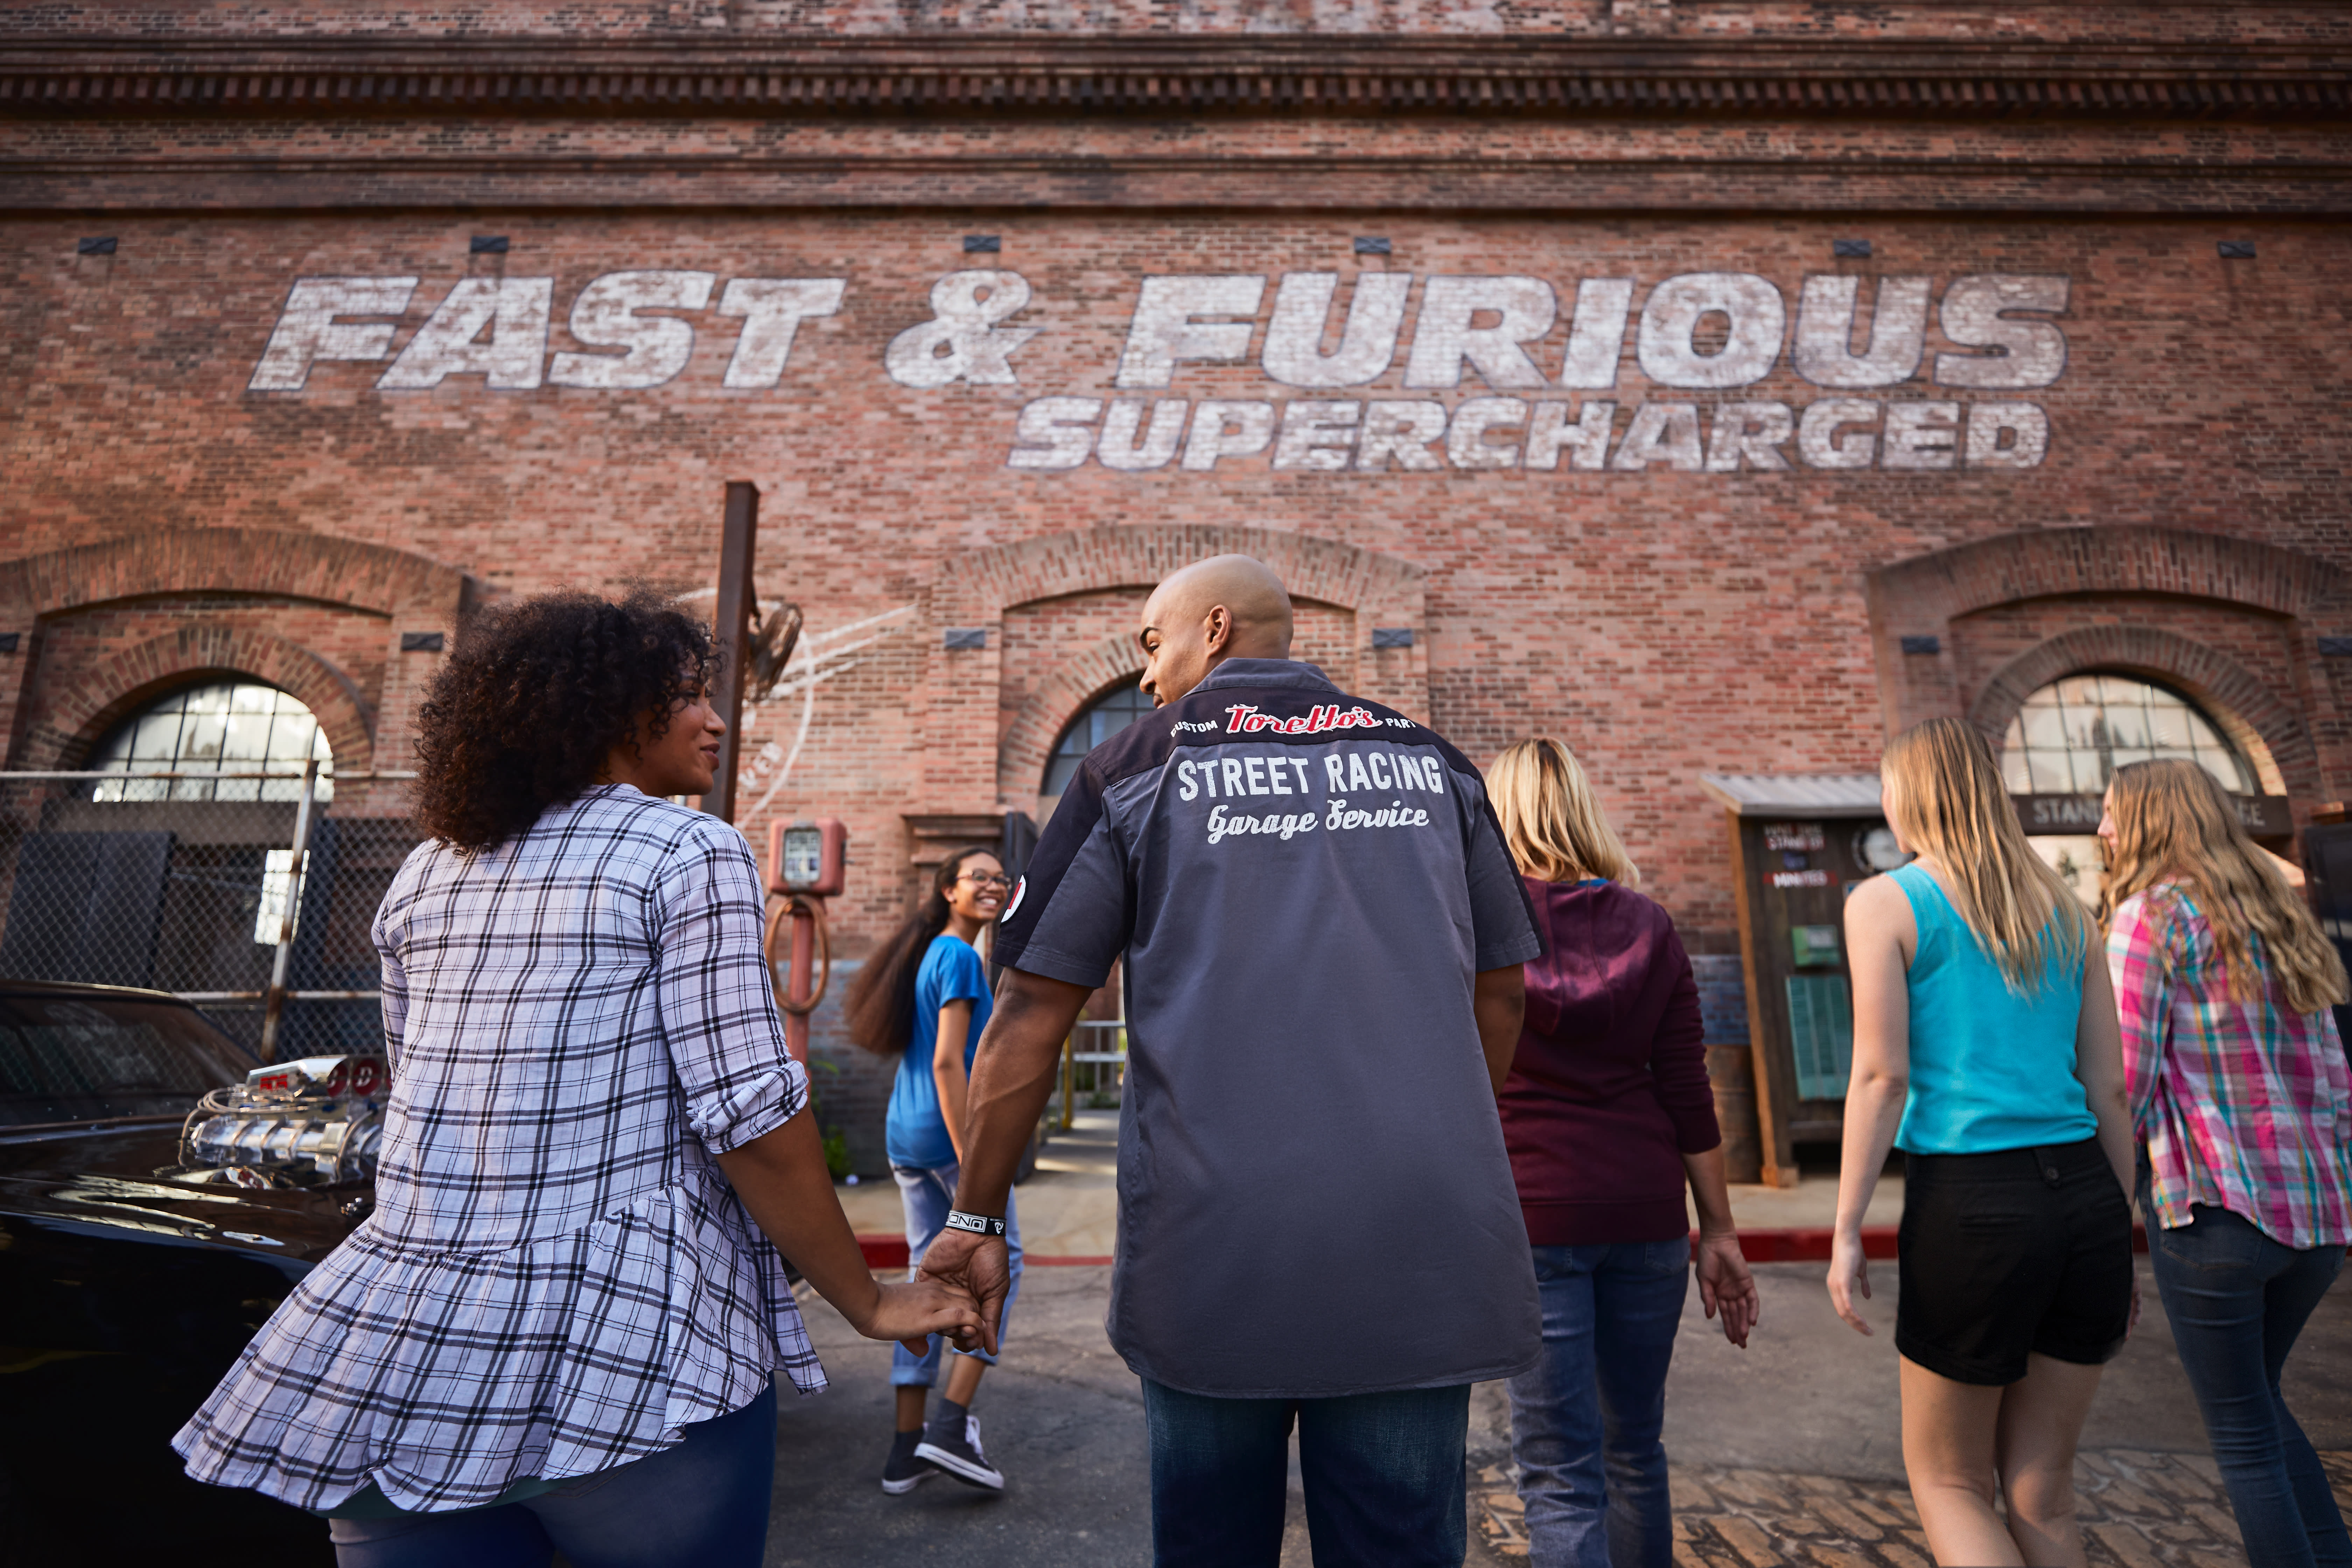 Fast & Furious — Supercharged at Universal Studios Florida in Orlando